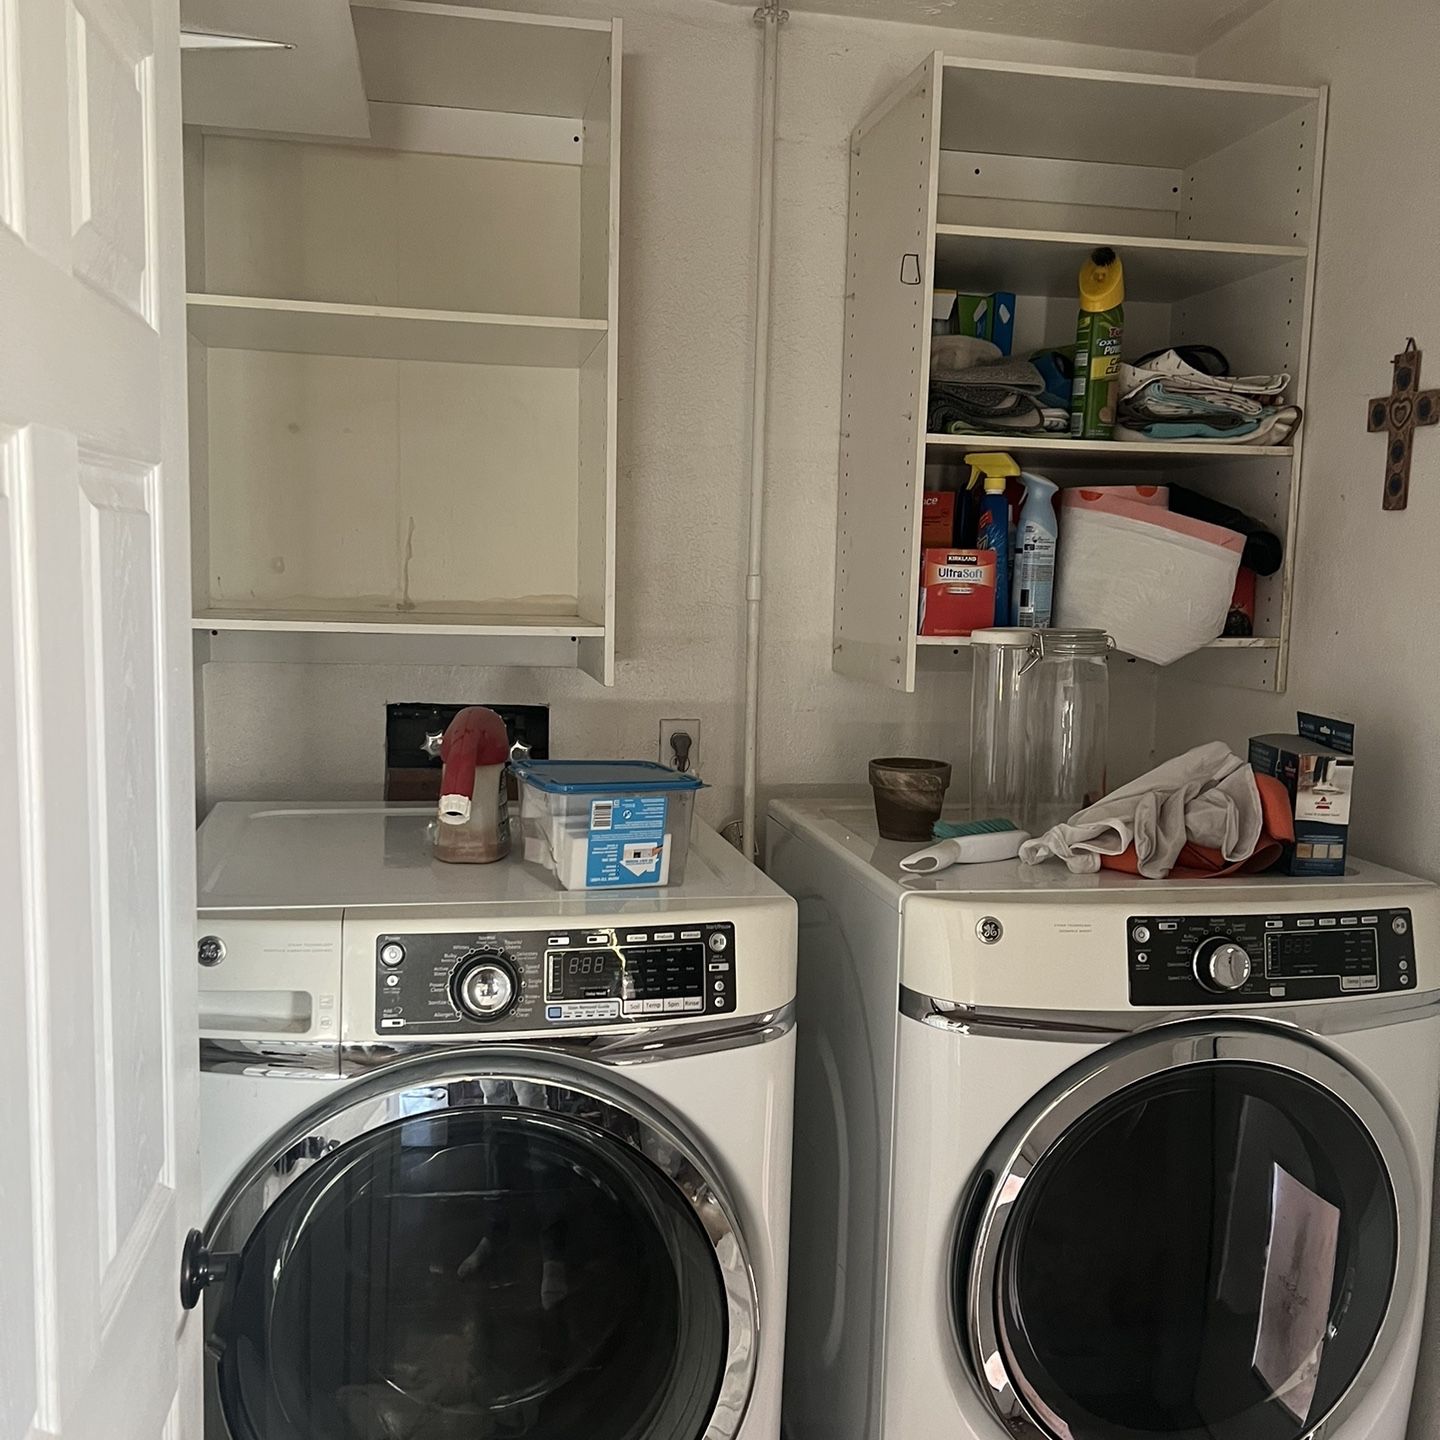 GE Washer And dryer Set